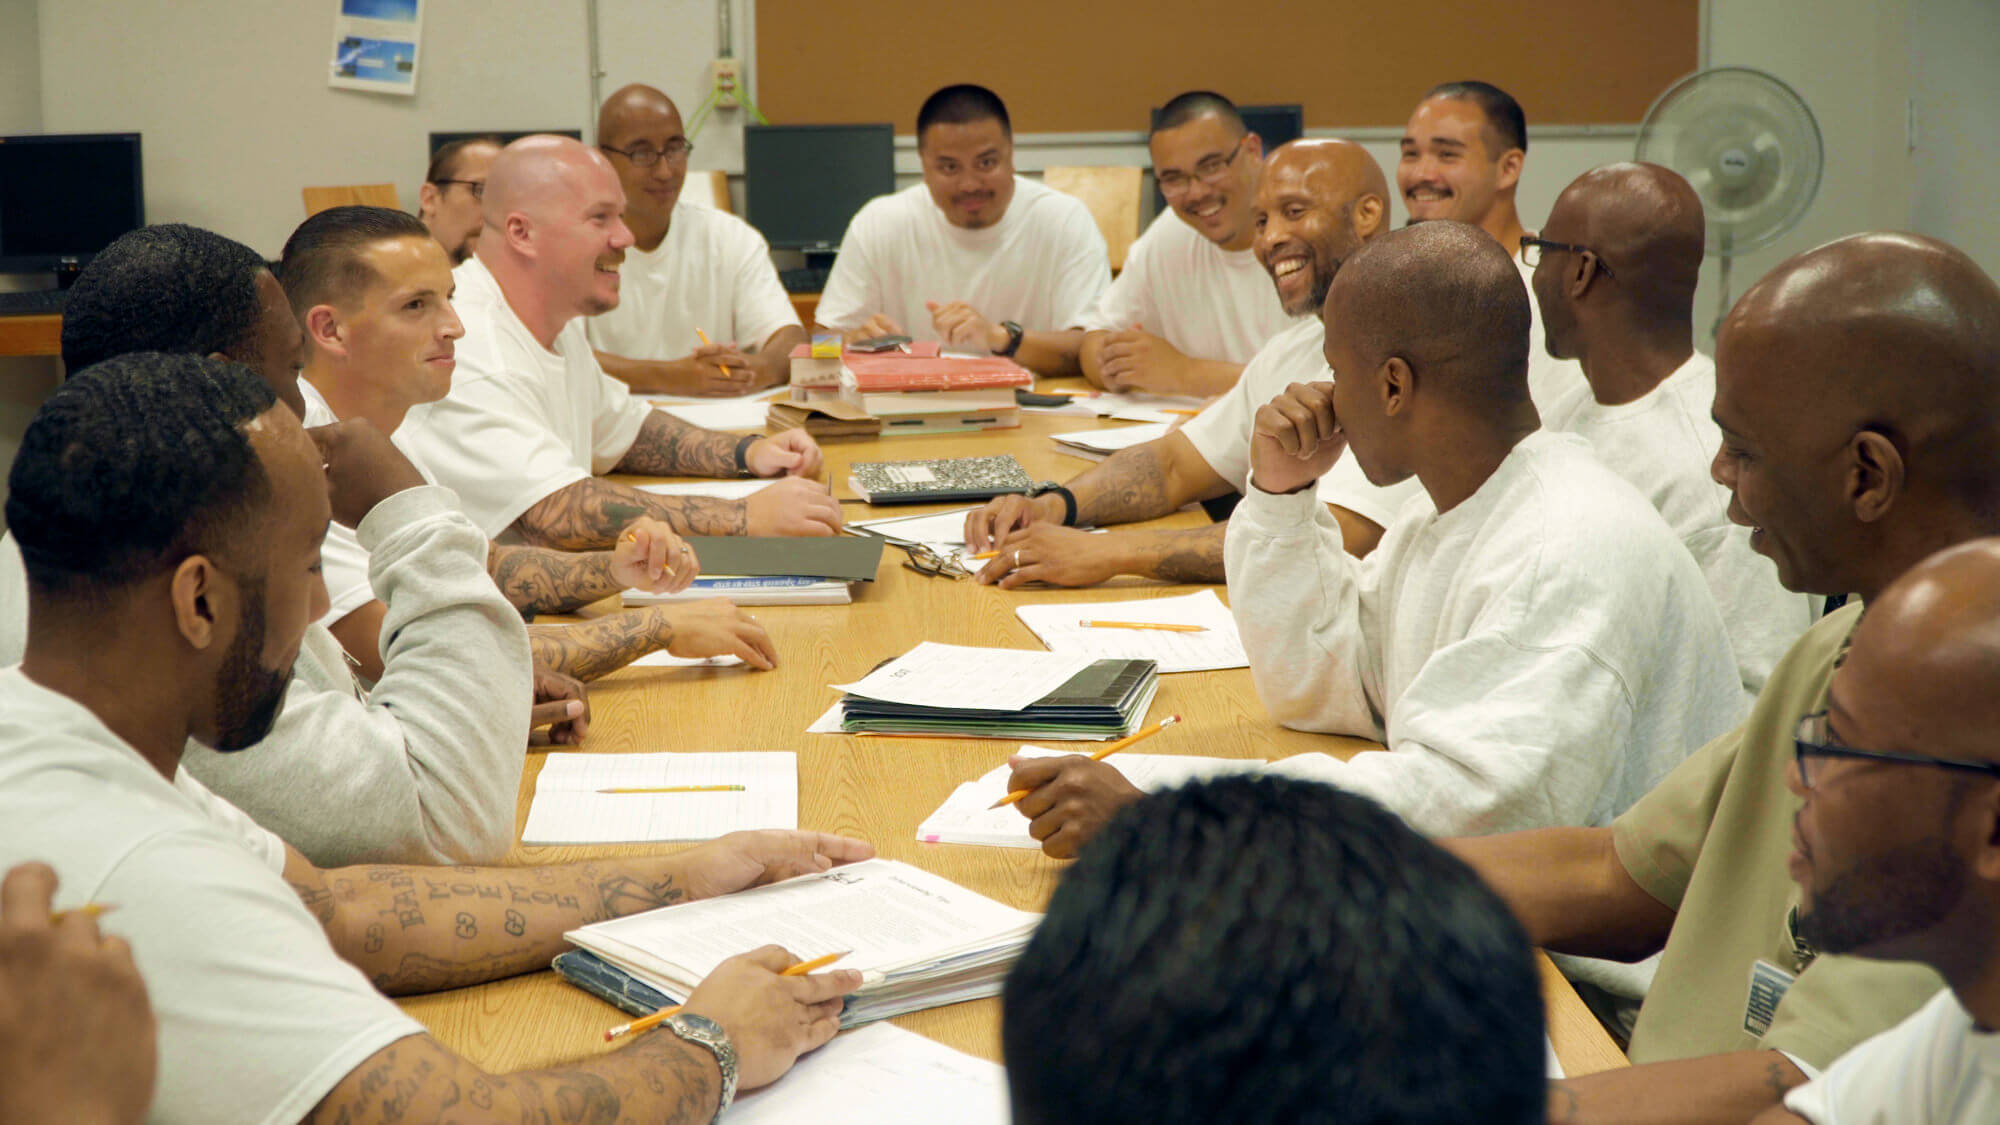 Still from Since I Been Down. A group of men in prison is sitting at the table, they have papers and pencils. Some of them smile.